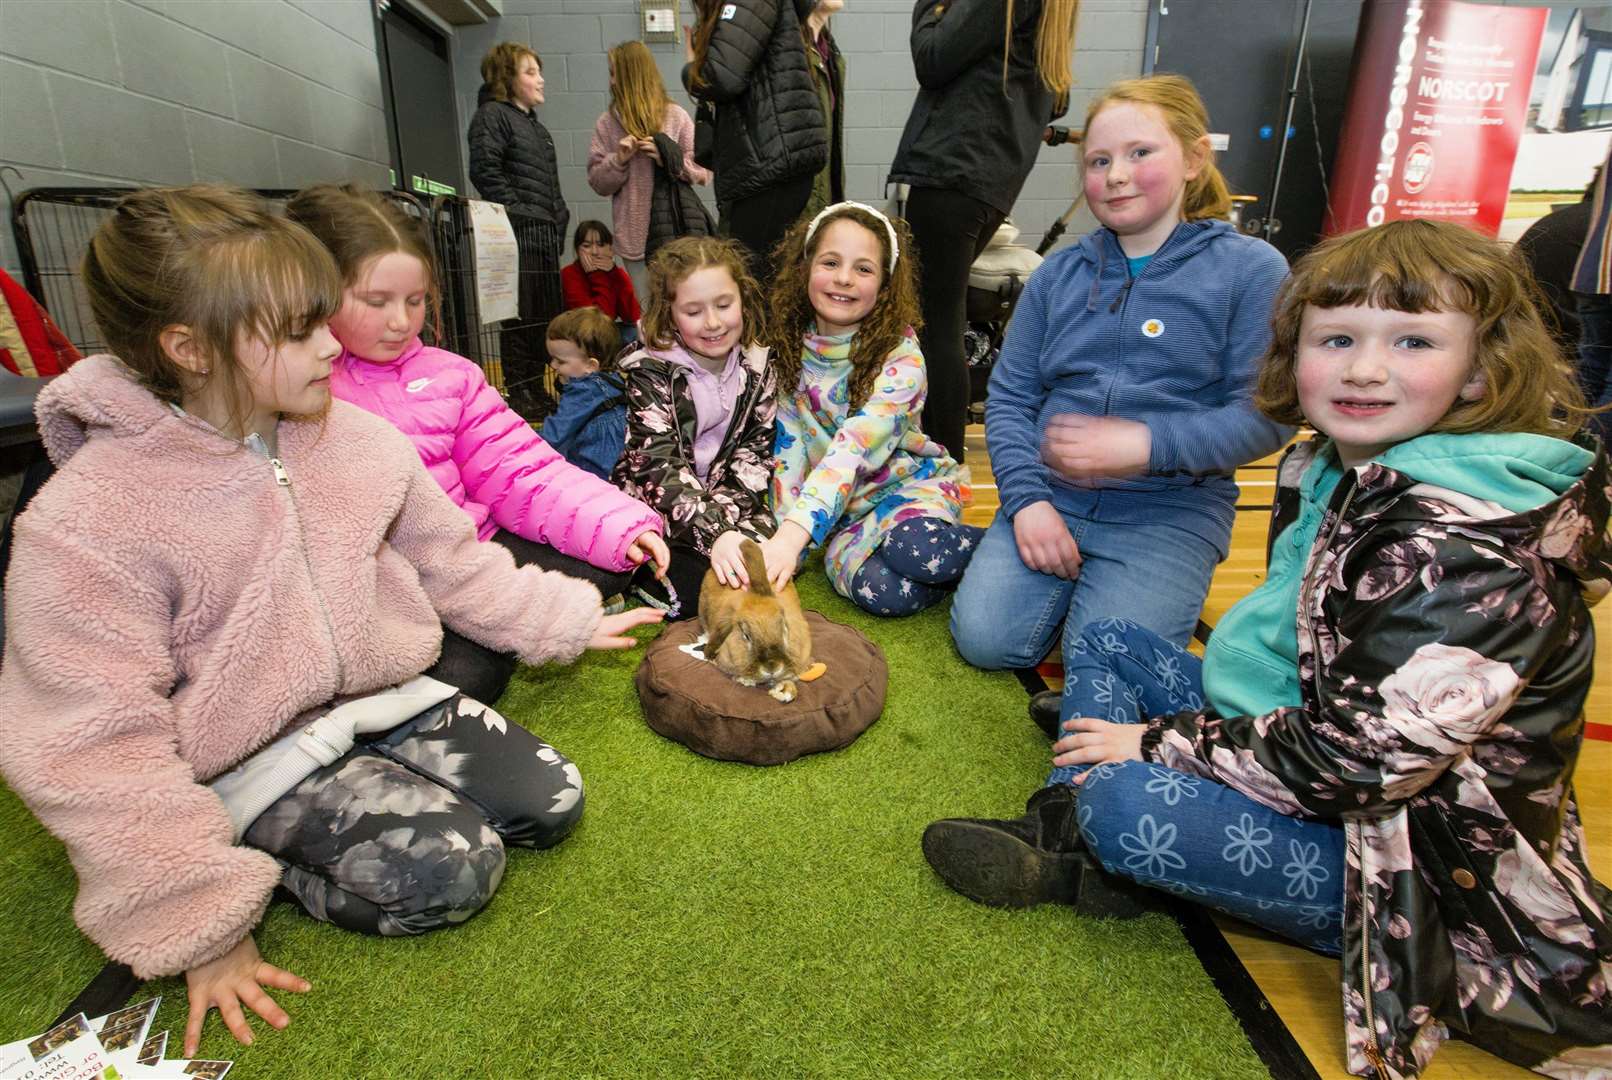 The Caithness Animal Farm Park stand proved very popular with the visitors who were only too happy to pet the animals, including this rabbit.Photo: Robert MacDonald/Northern Studios